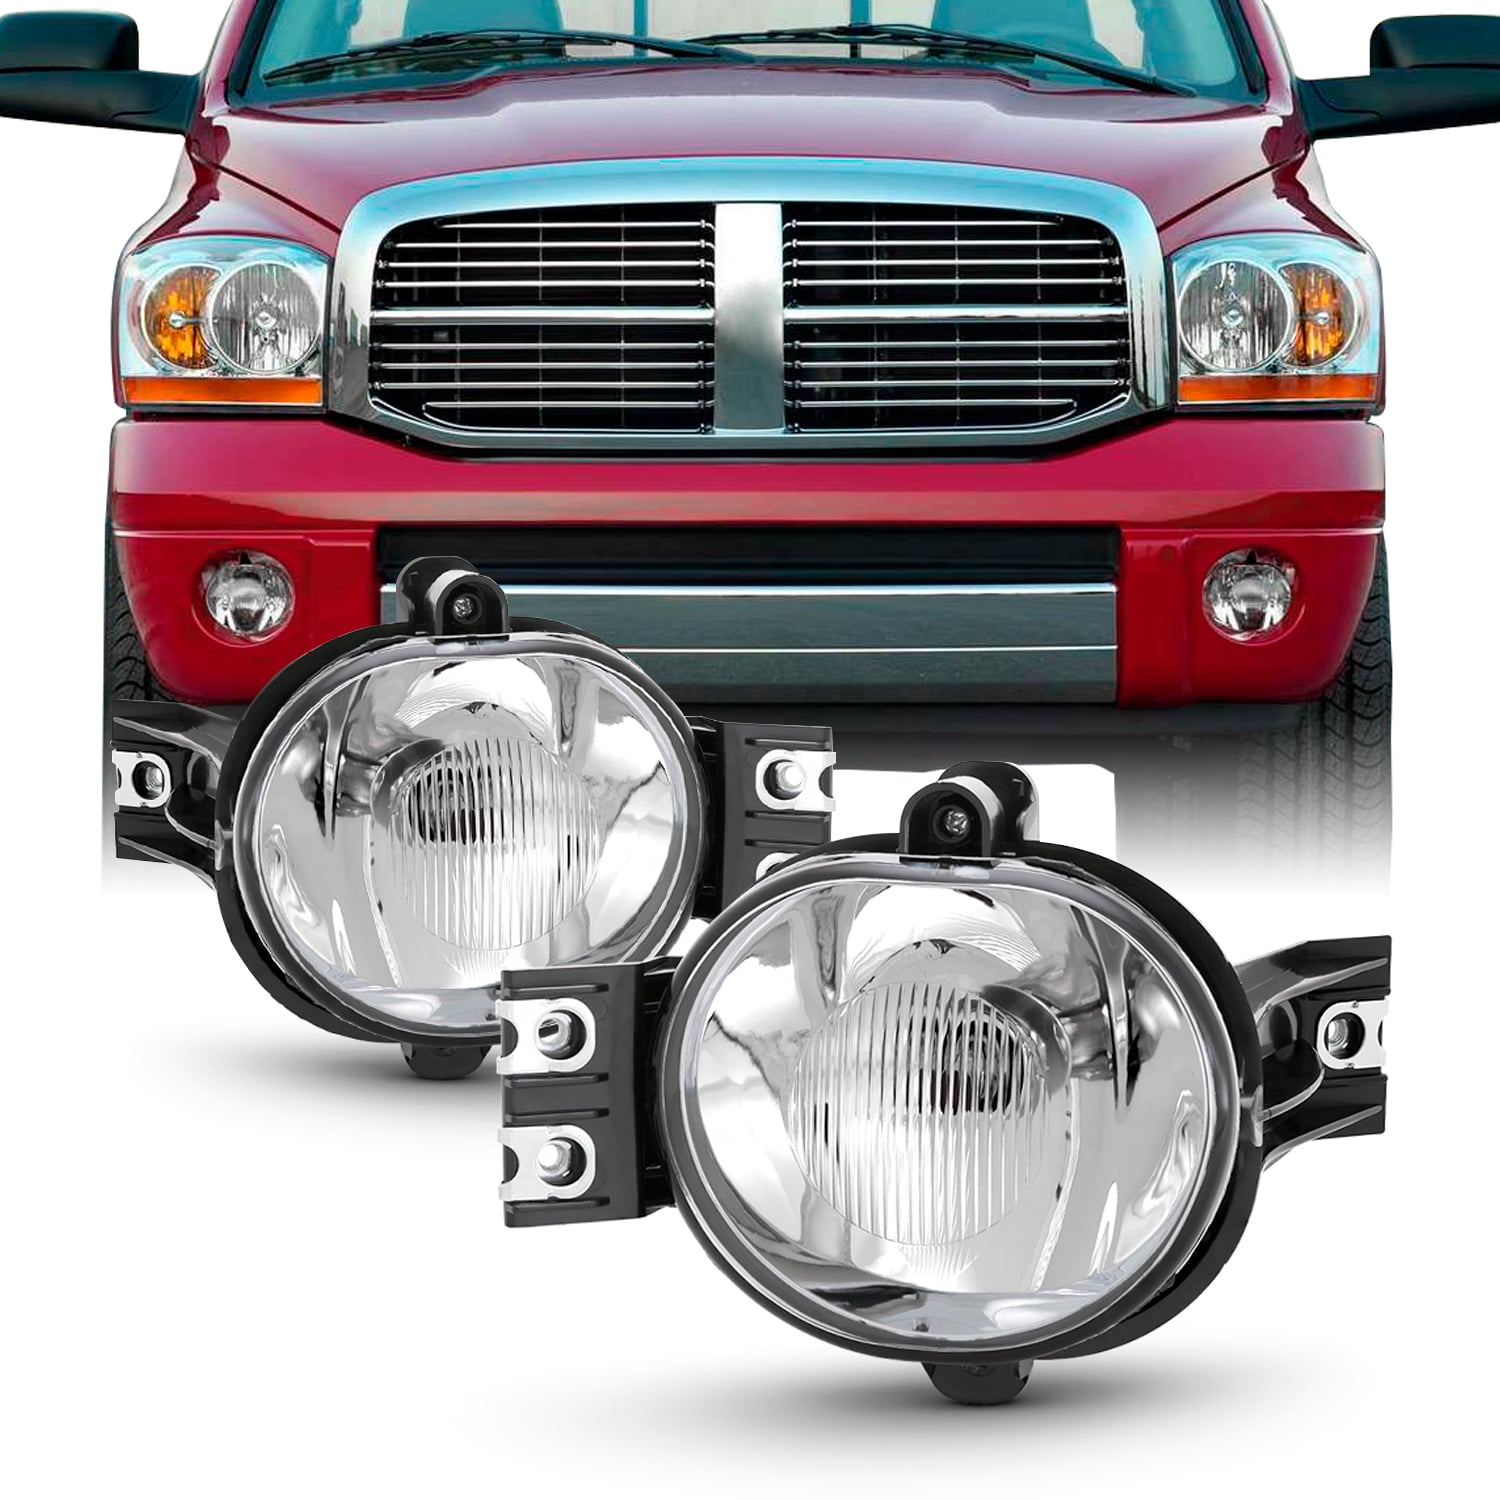 Driving Fog Lights with Clear Lens for 02-08 Dodge Ram 1500 03-09 Dodge Ram 2500 03-10 Dodge Ram 3500 Fog Lamps for Passenger and Driver Side with OE Part # 55077474AE 55077475AE 